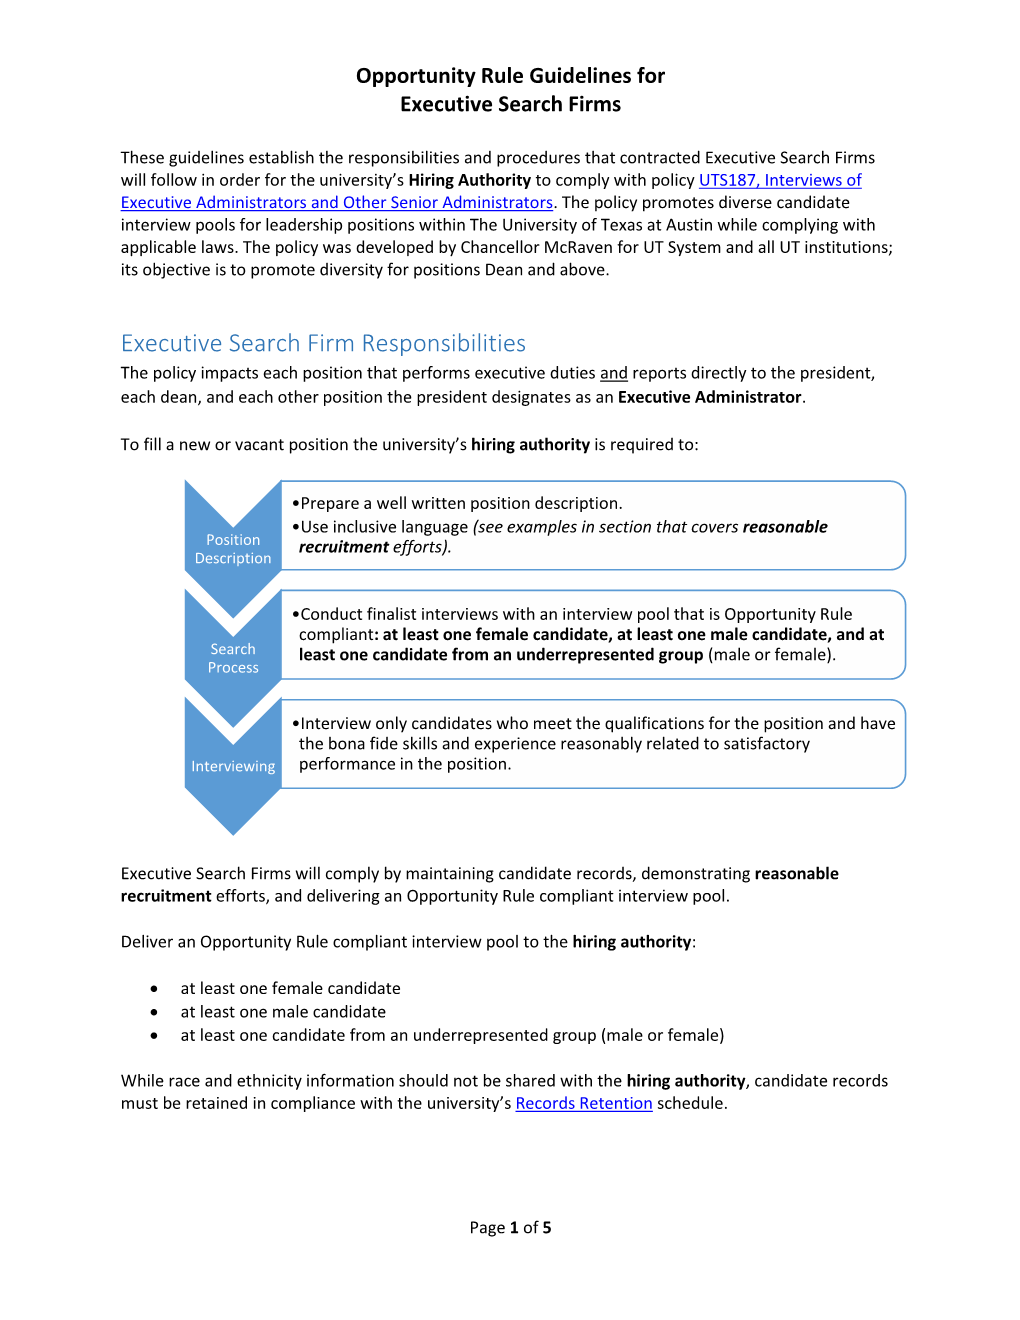 Opportunity Rule Guidelines for Executive Search Firms